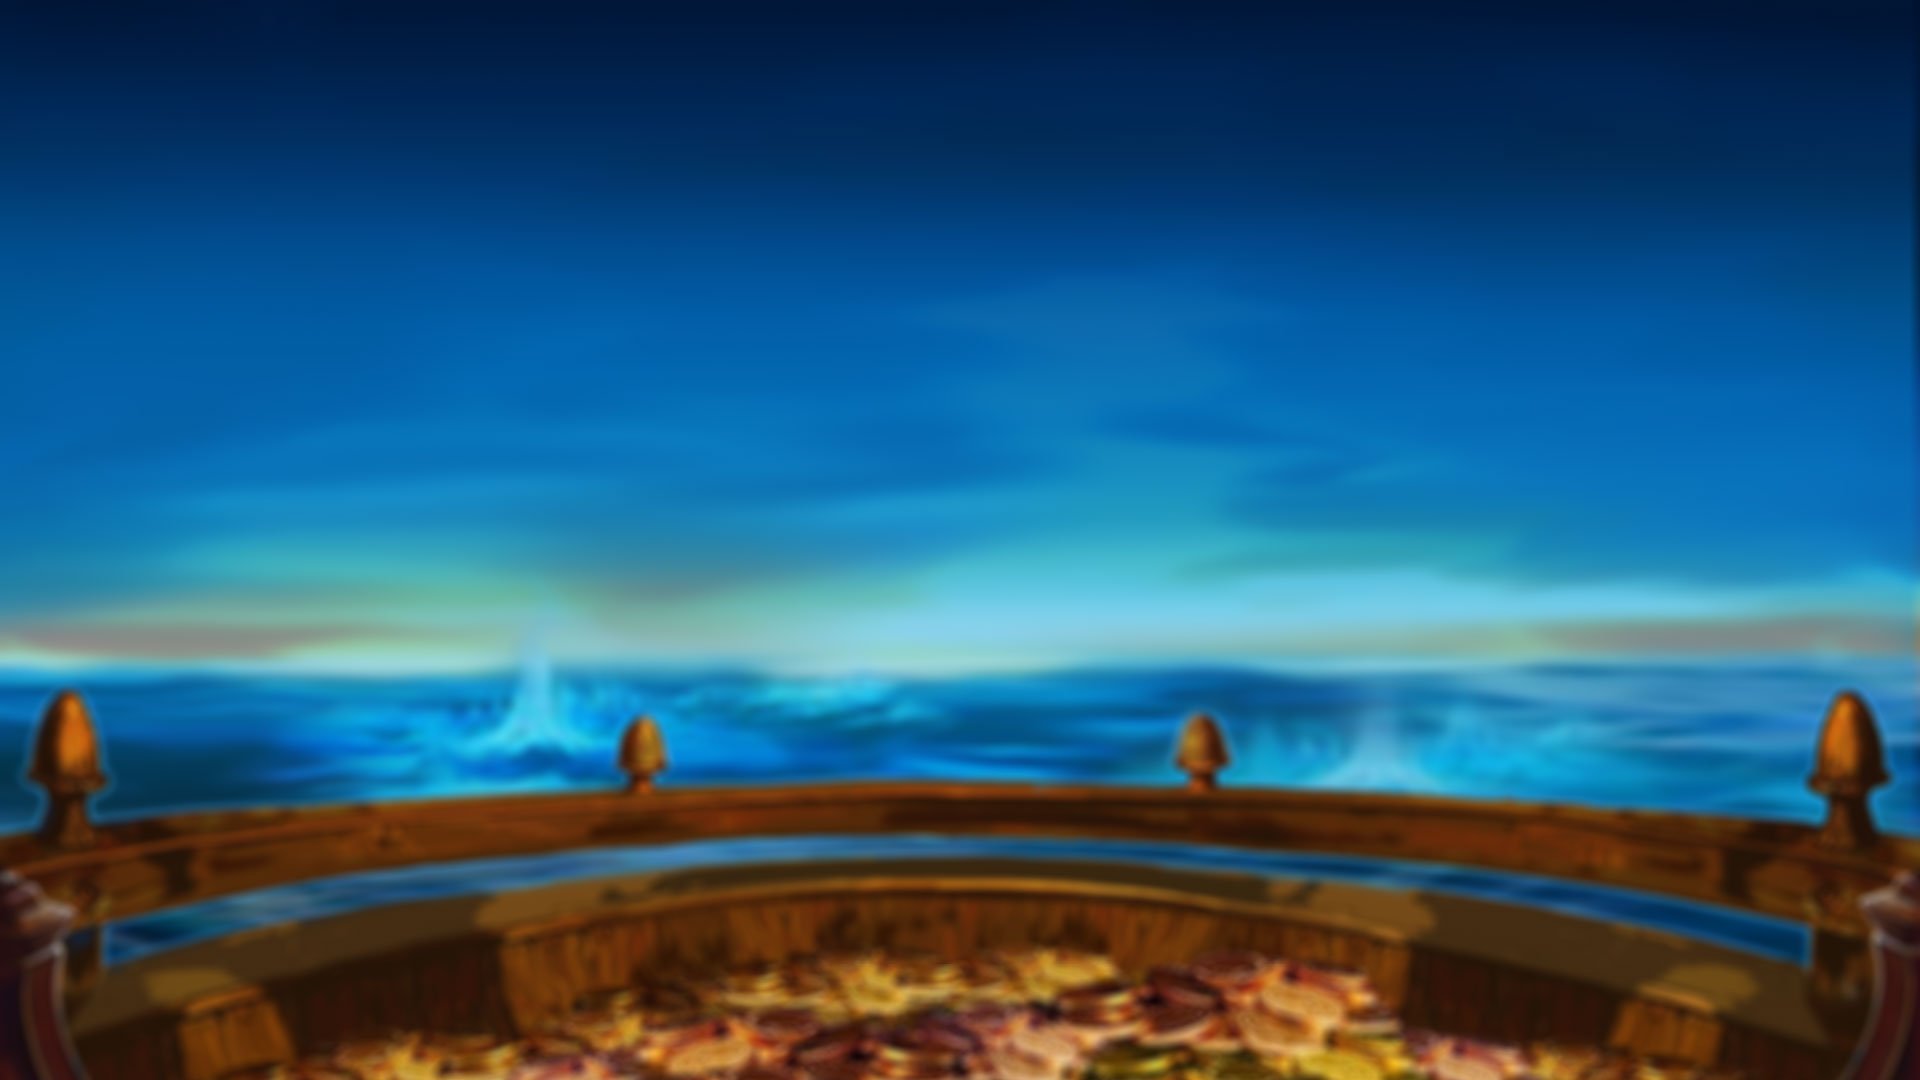 Game hight resolution background Five Pirates